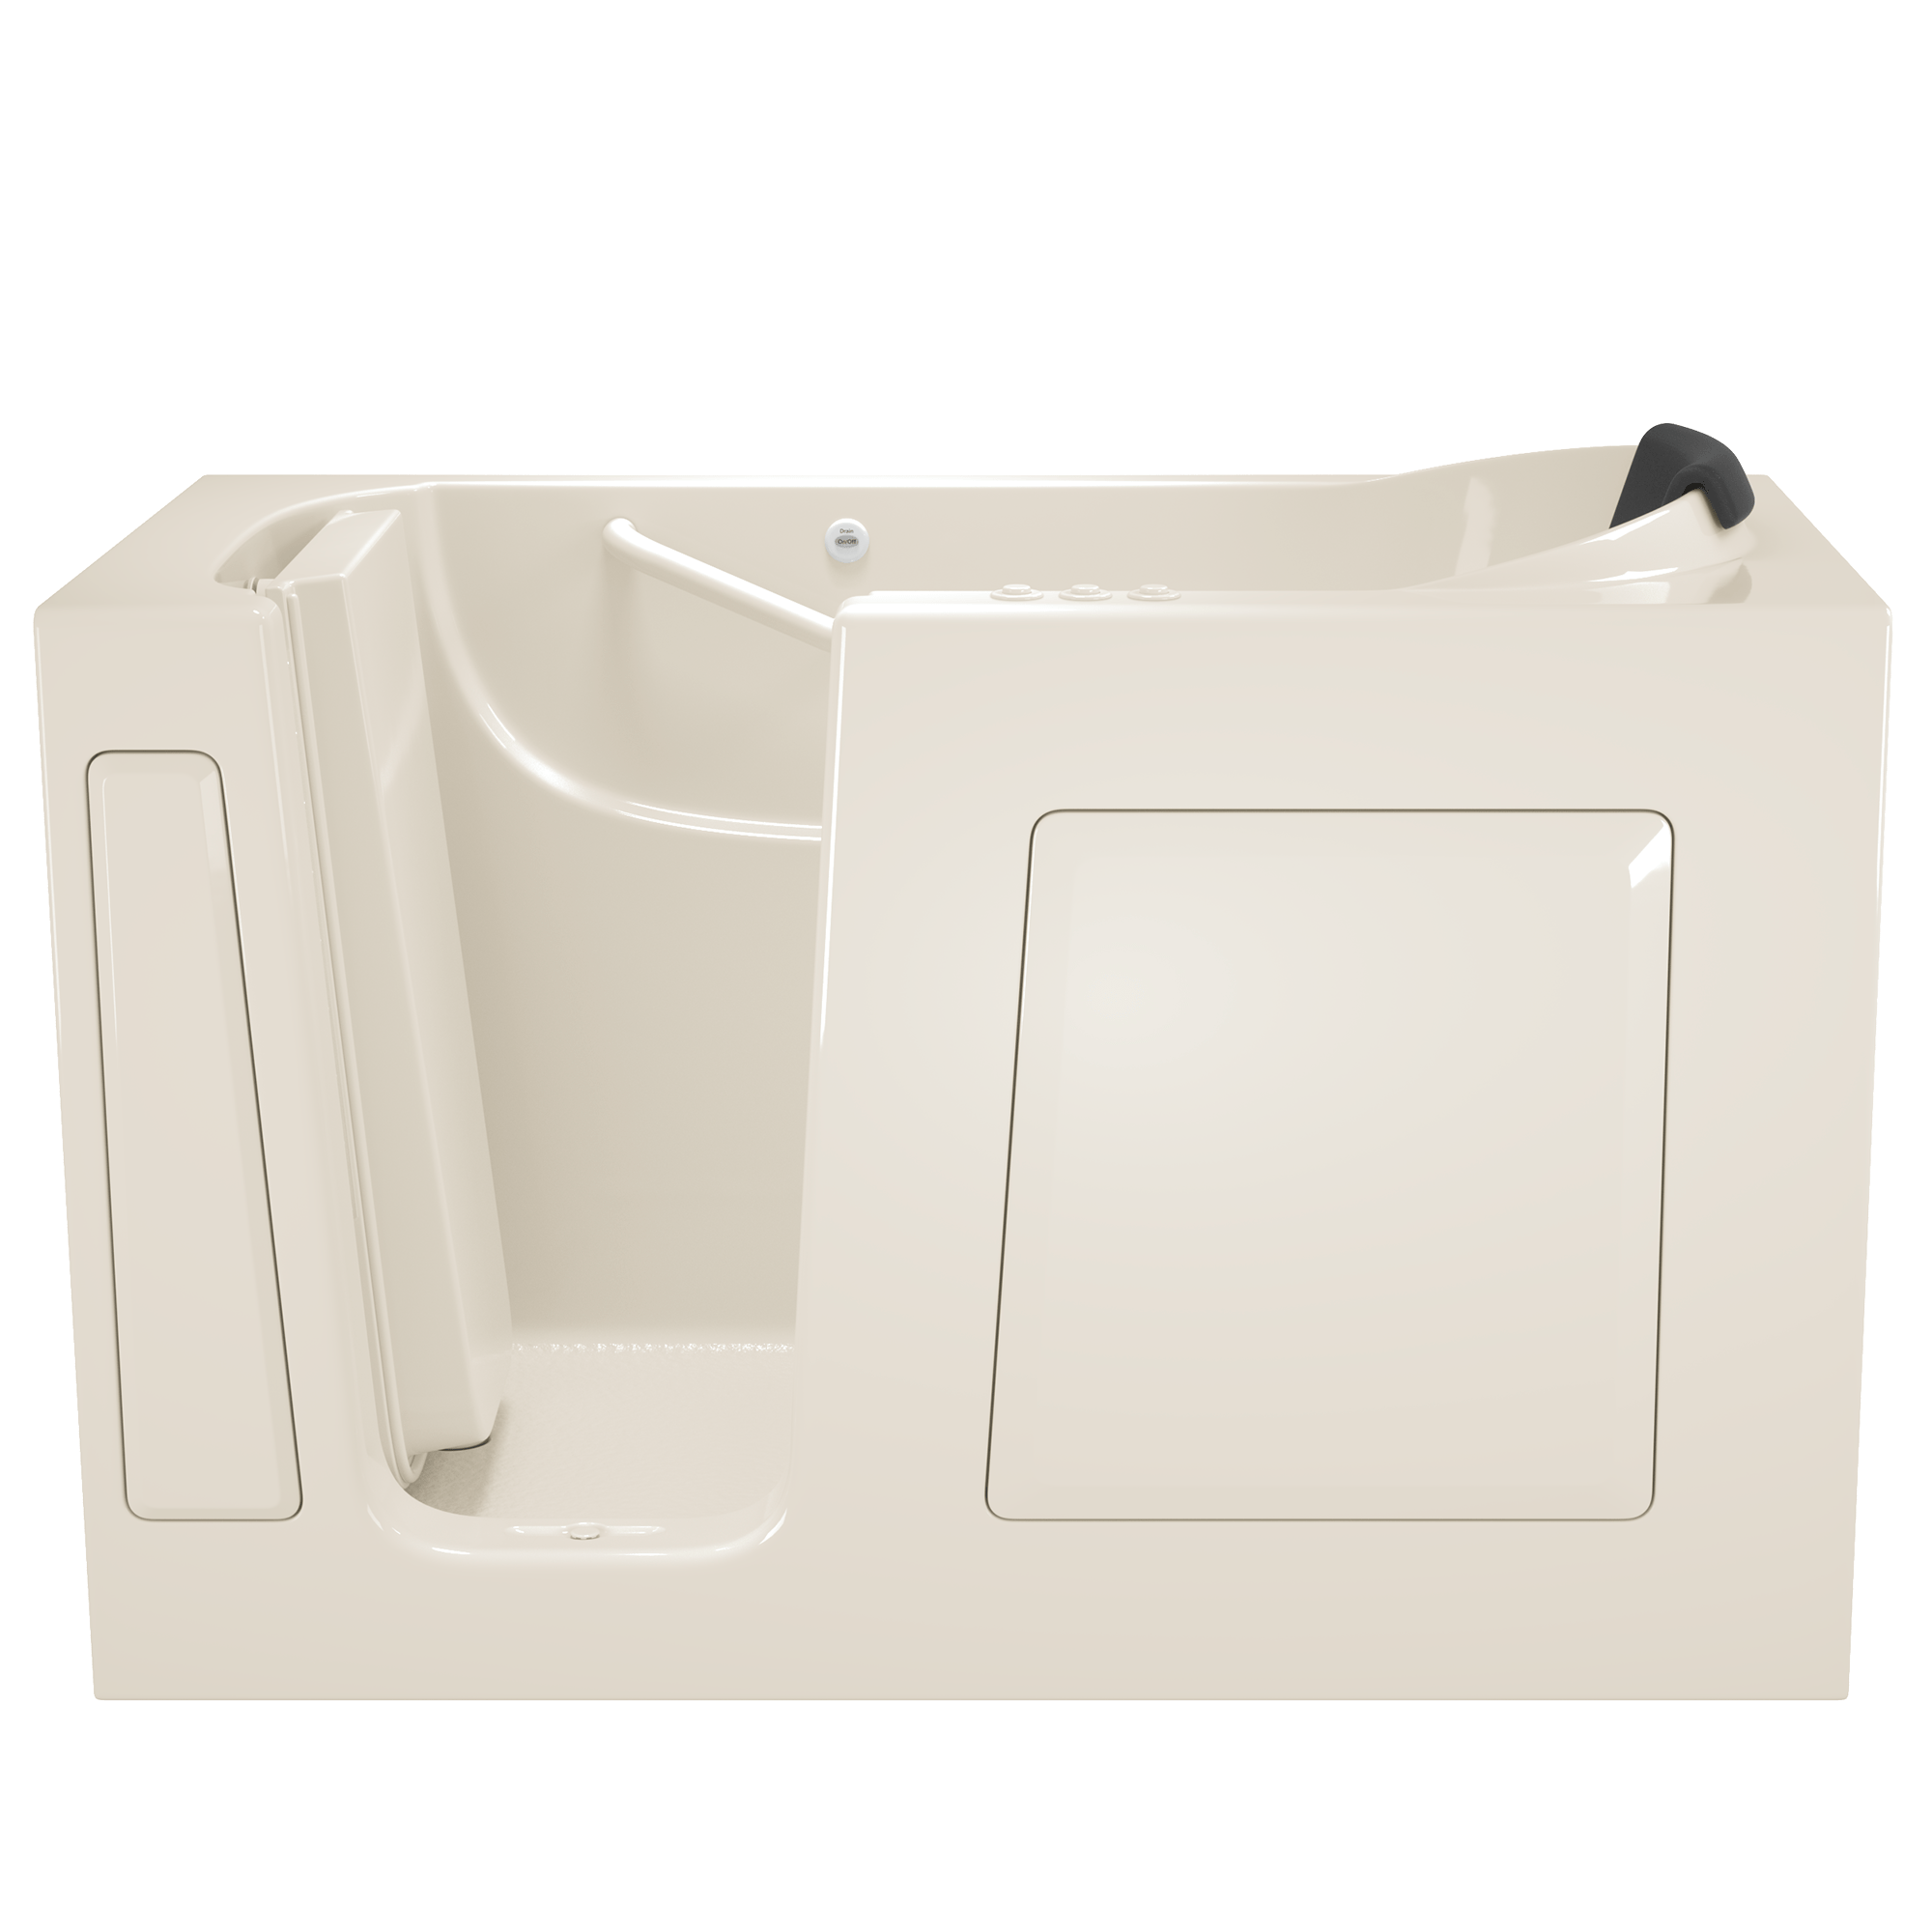 Gelcoat Premium Series 30 x 60 -Inch Walk-in Tub With Combination Air Spa and Whirlpool Systems - Left-Hand Drain